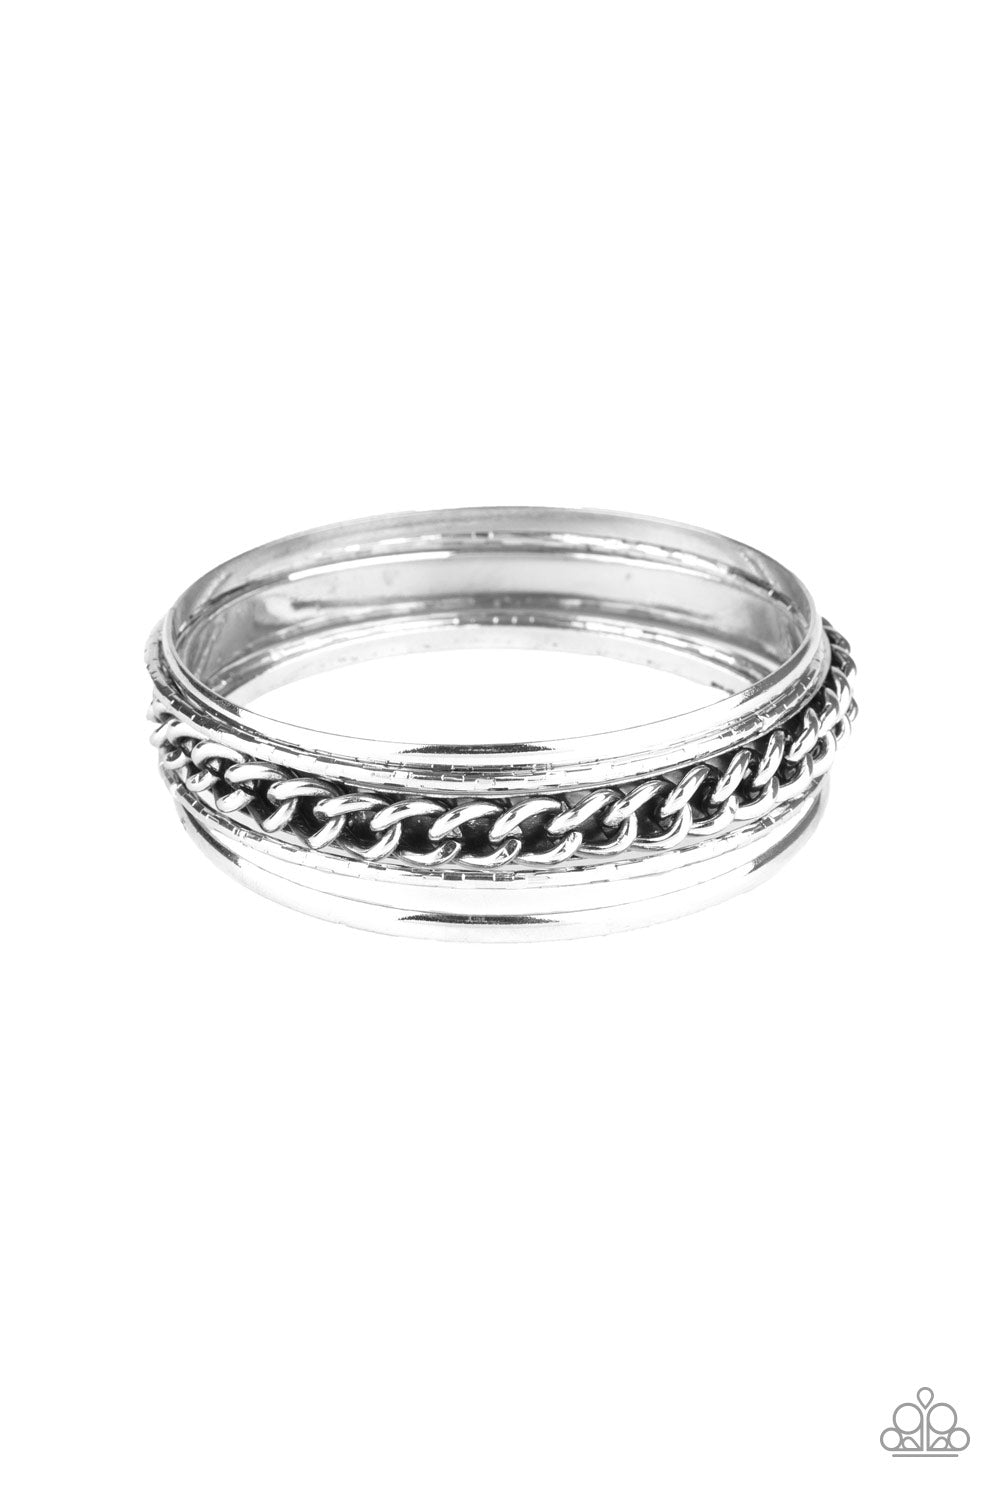 &lt;P&gt;Pairs of smooth and textured silver bangles join an antiqued bangle around the wrist that is decorated in a single strand of silver chain for a gritty finish.  &lt;/P&gt;

&lt;P&gt;&lt;I&gt; Sold as one set of five bracelets.&lt;/I&gt;&lt;/p&gt;


&lt;img src=\&quot;https://d9b54x484lq62.cloudfront.net/paparazzi/shopping/images/517_tag150x115_1.png\&quot; alt=\&quot;New Kit\&quot; align=\&quot;middle\&quot; height=\&quot;50\&quot; width=\&quot;50\&quot;/&gt;